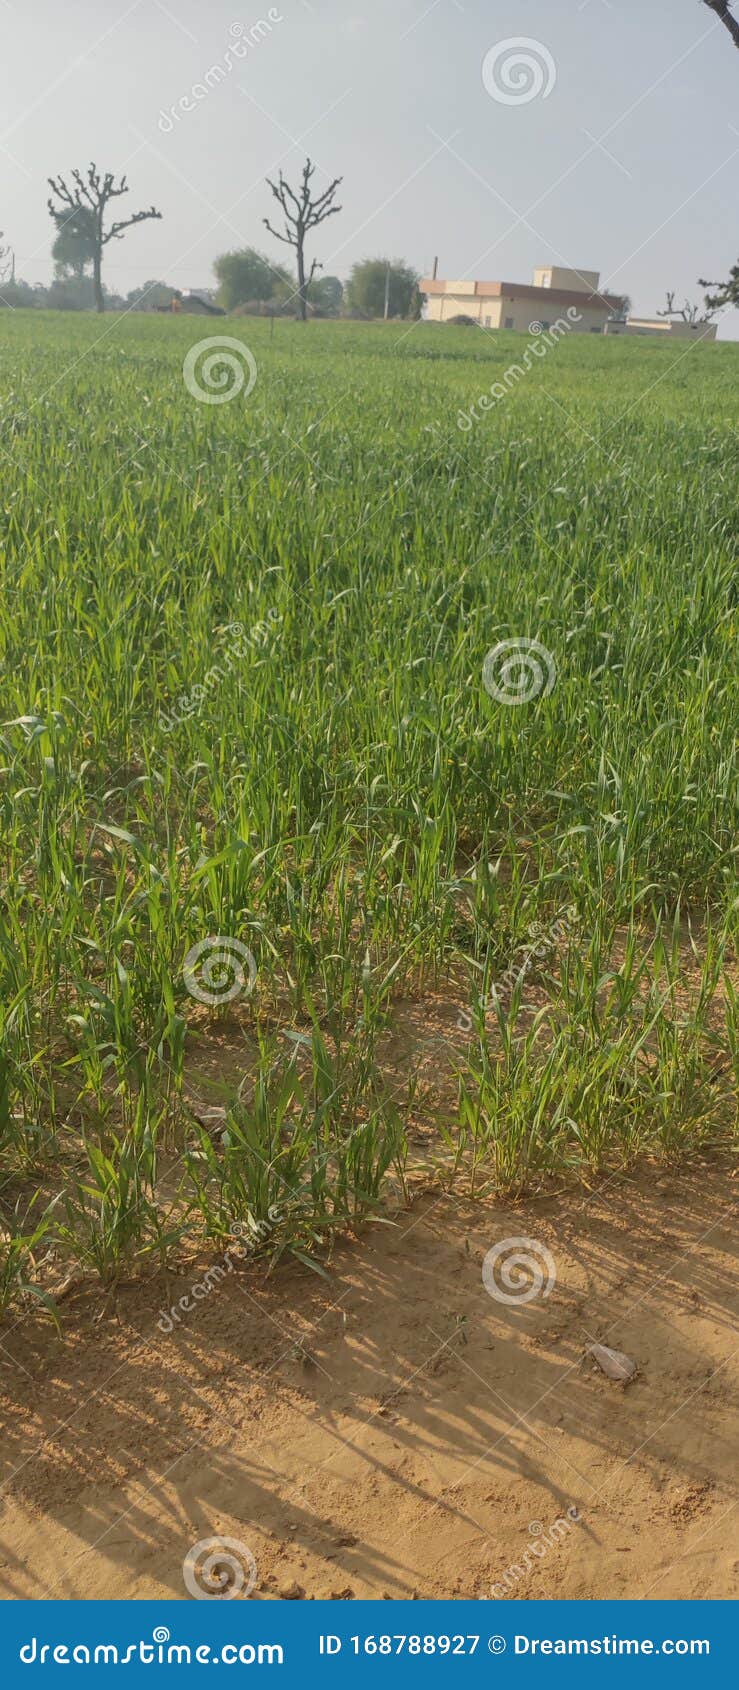 Indian Agriculture Wheat in Pasties Stock Image - Image of wheat, white ...